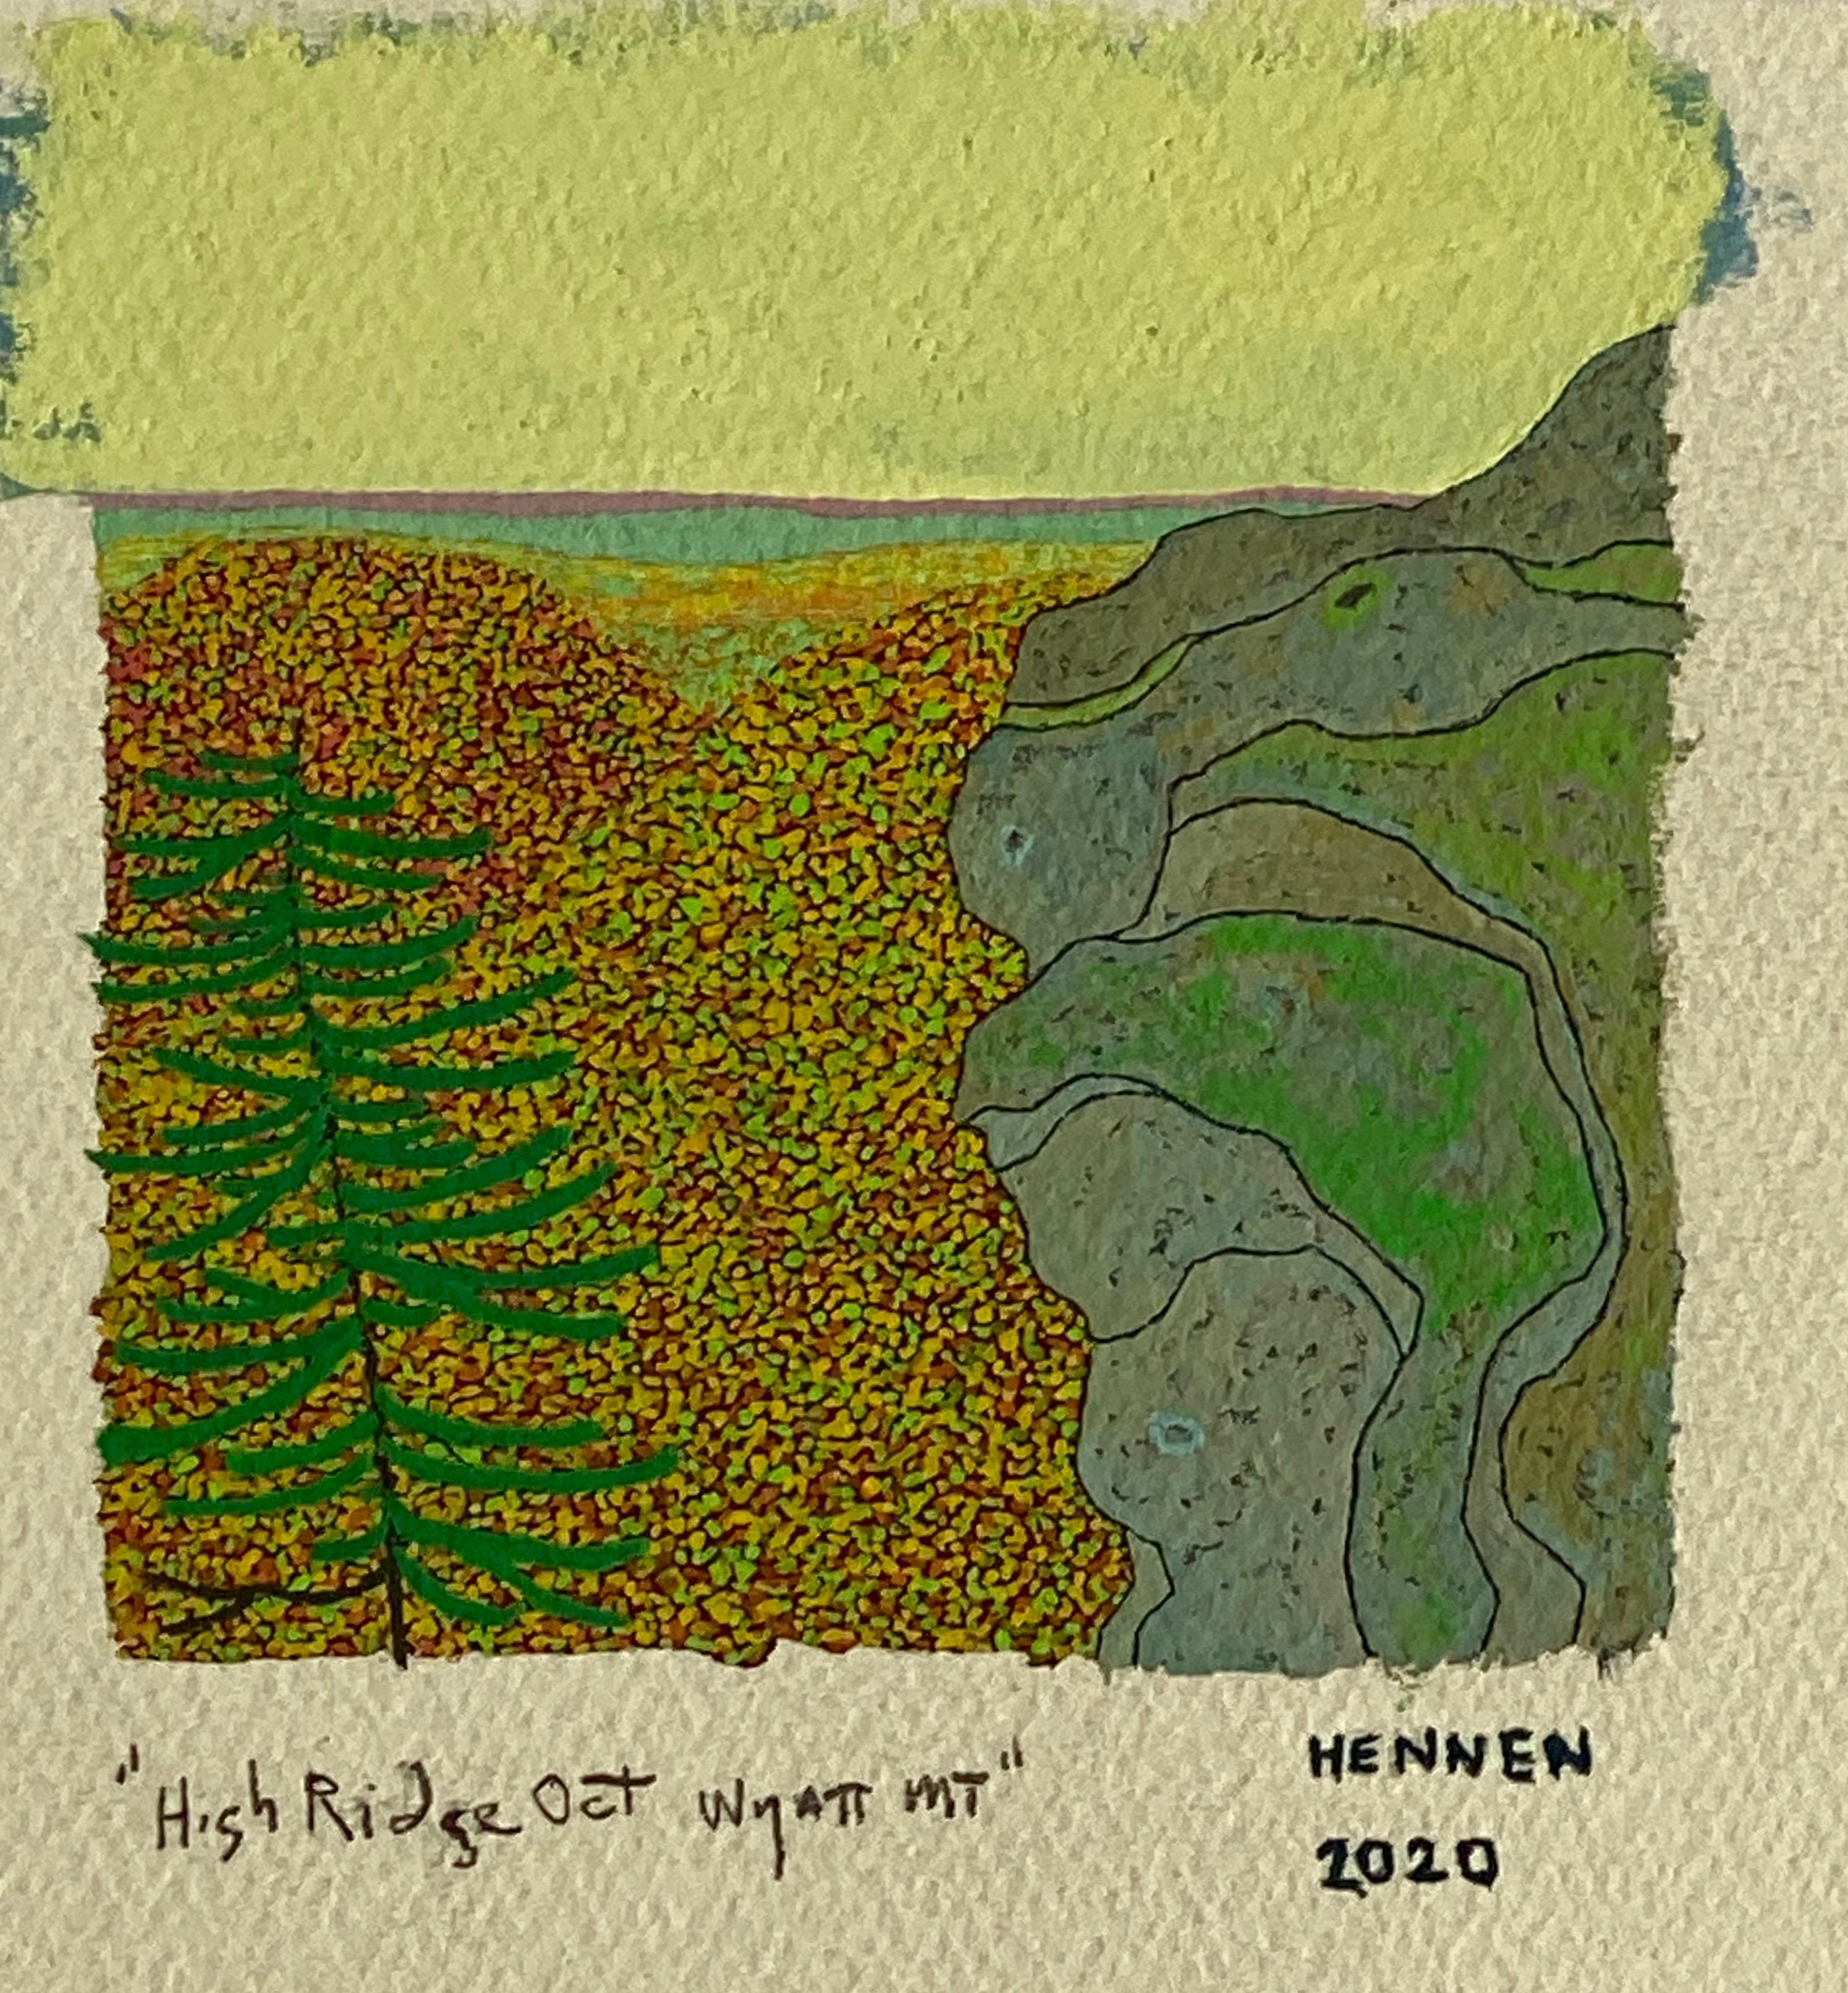 High Ridge, October, Wyatt Mt., Gray Mountain, Green, Yellow, Autumn Foliage - Contemporary Painting by Gregory Hennen